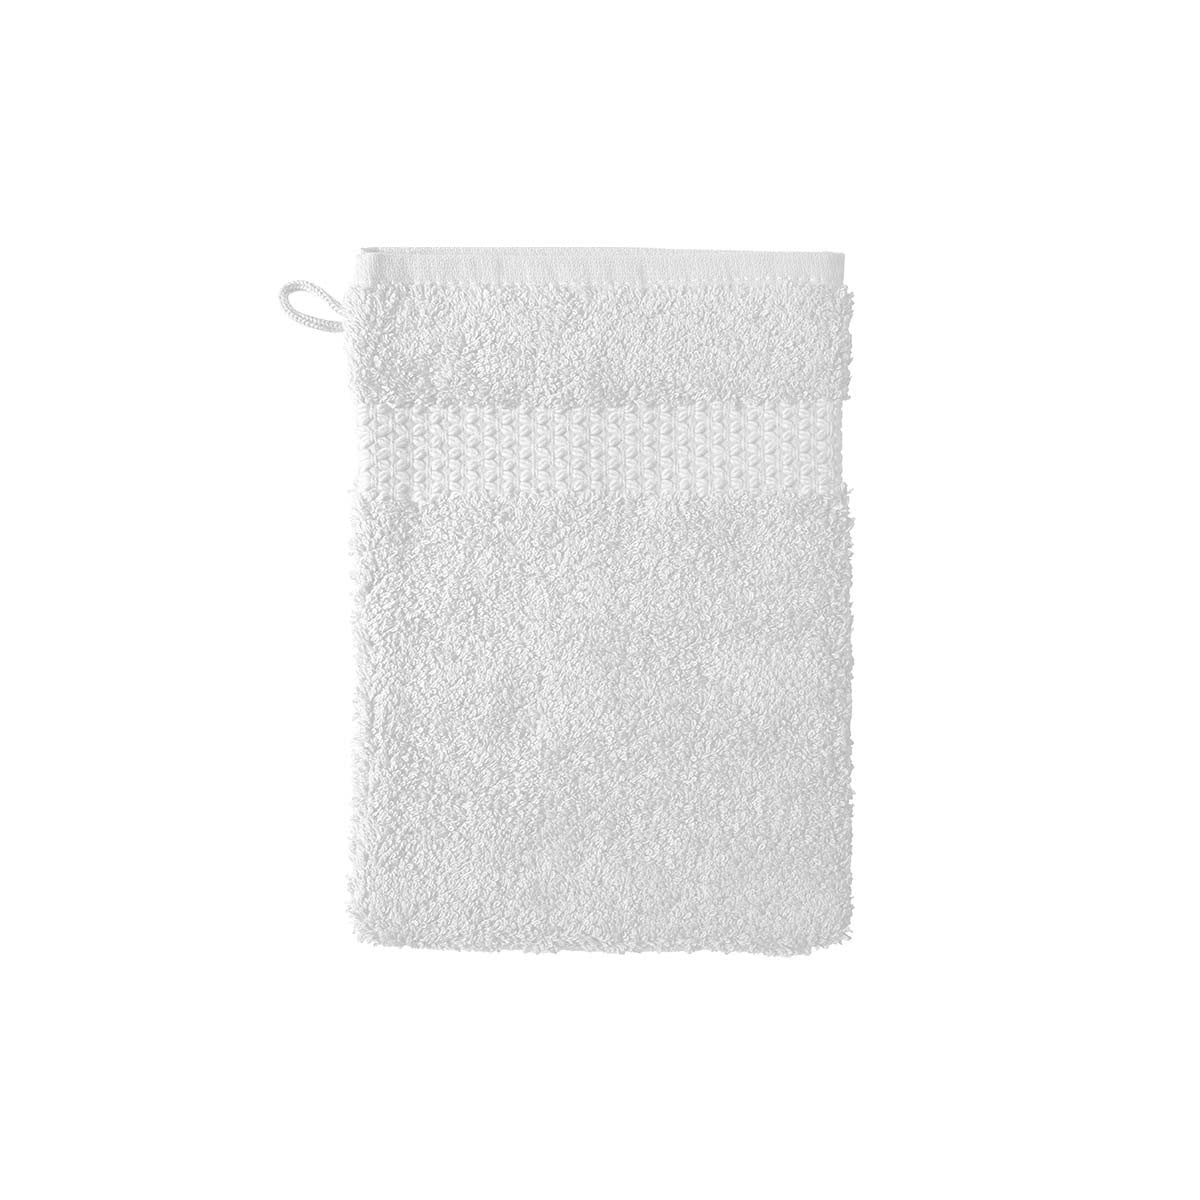 Etoile Blanc Bath Collection by Yves Delorme | Fig Linens - White wash mitt